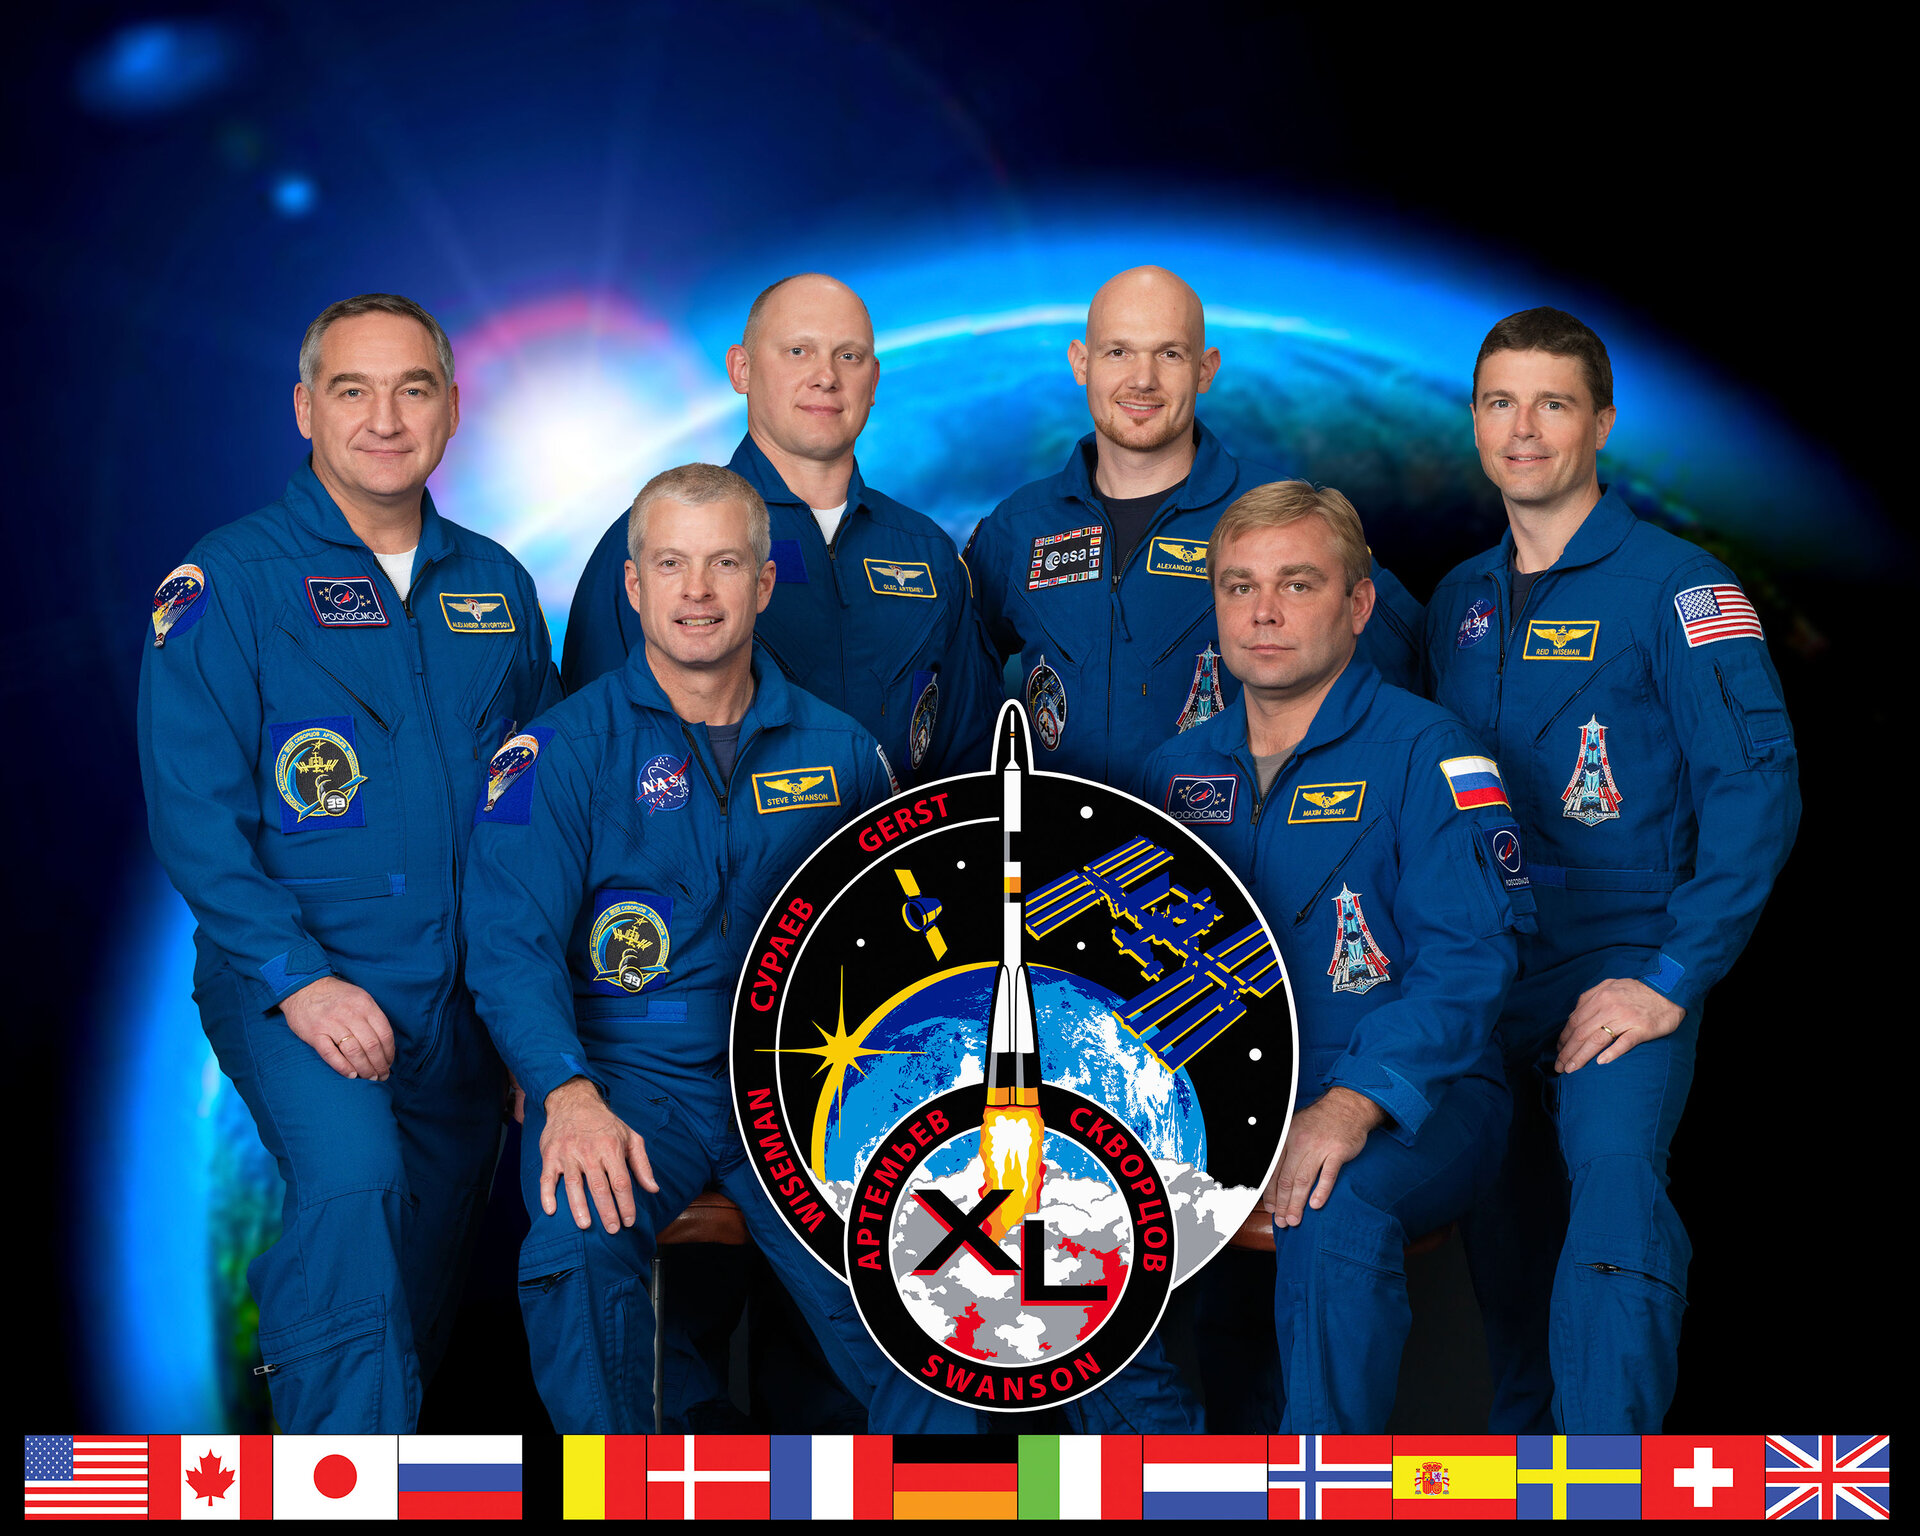 Expedition 40 crew members 